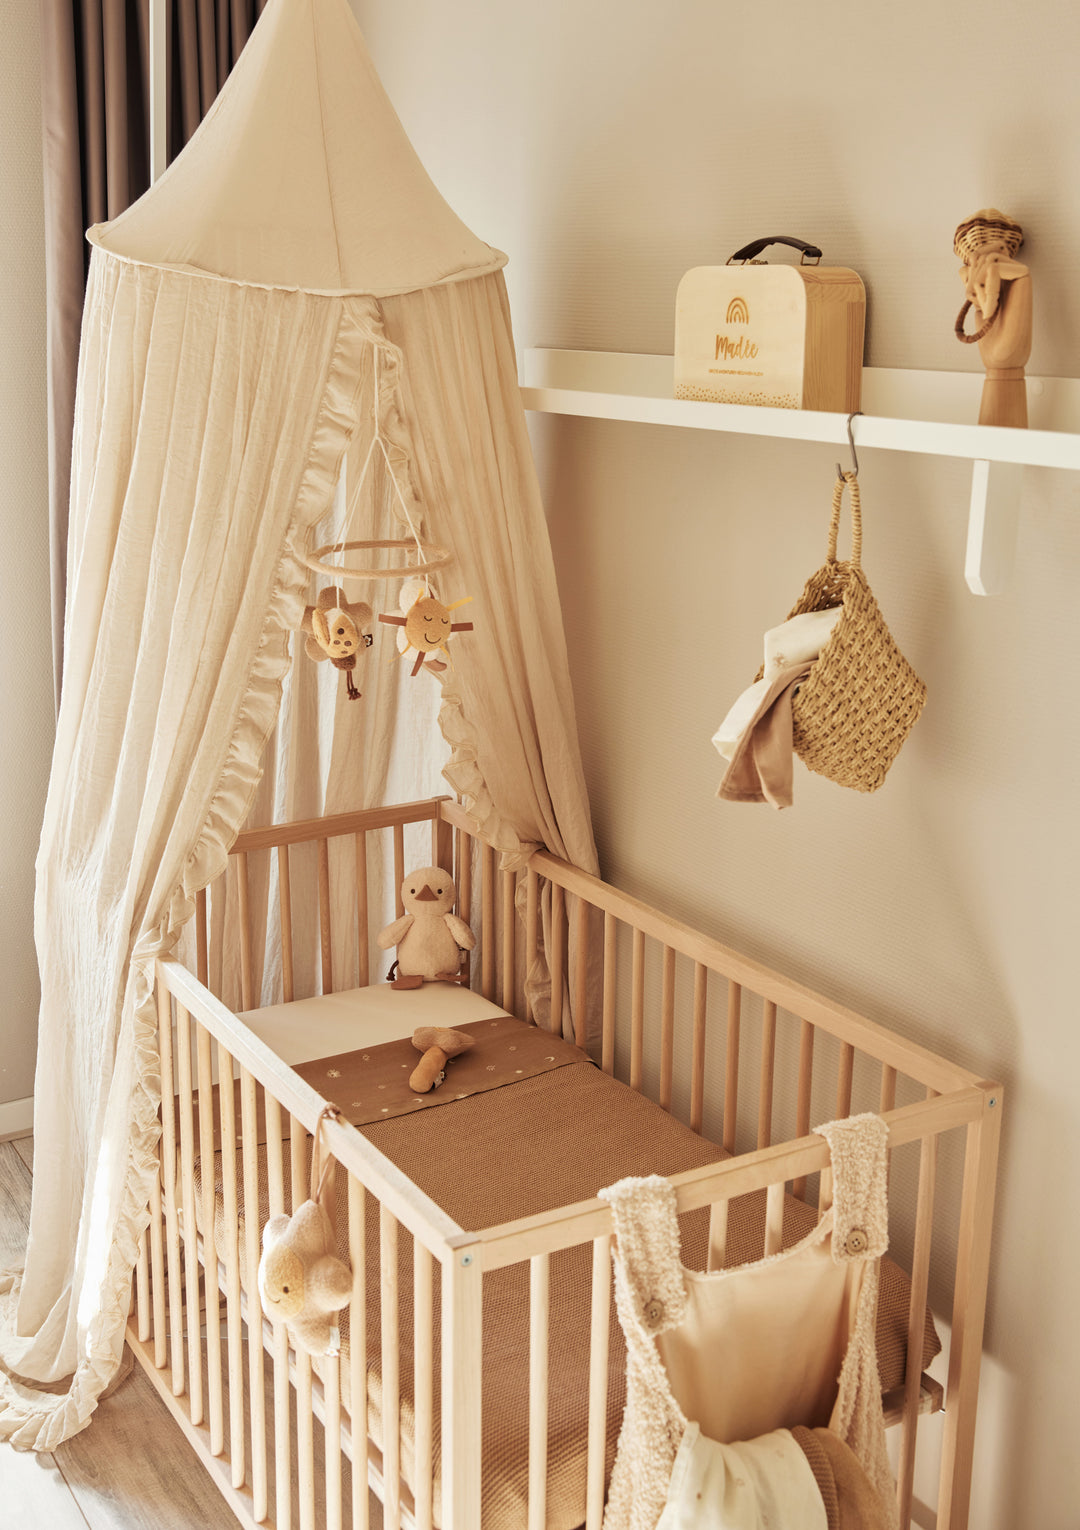 Ivory bed canopy | Jollein